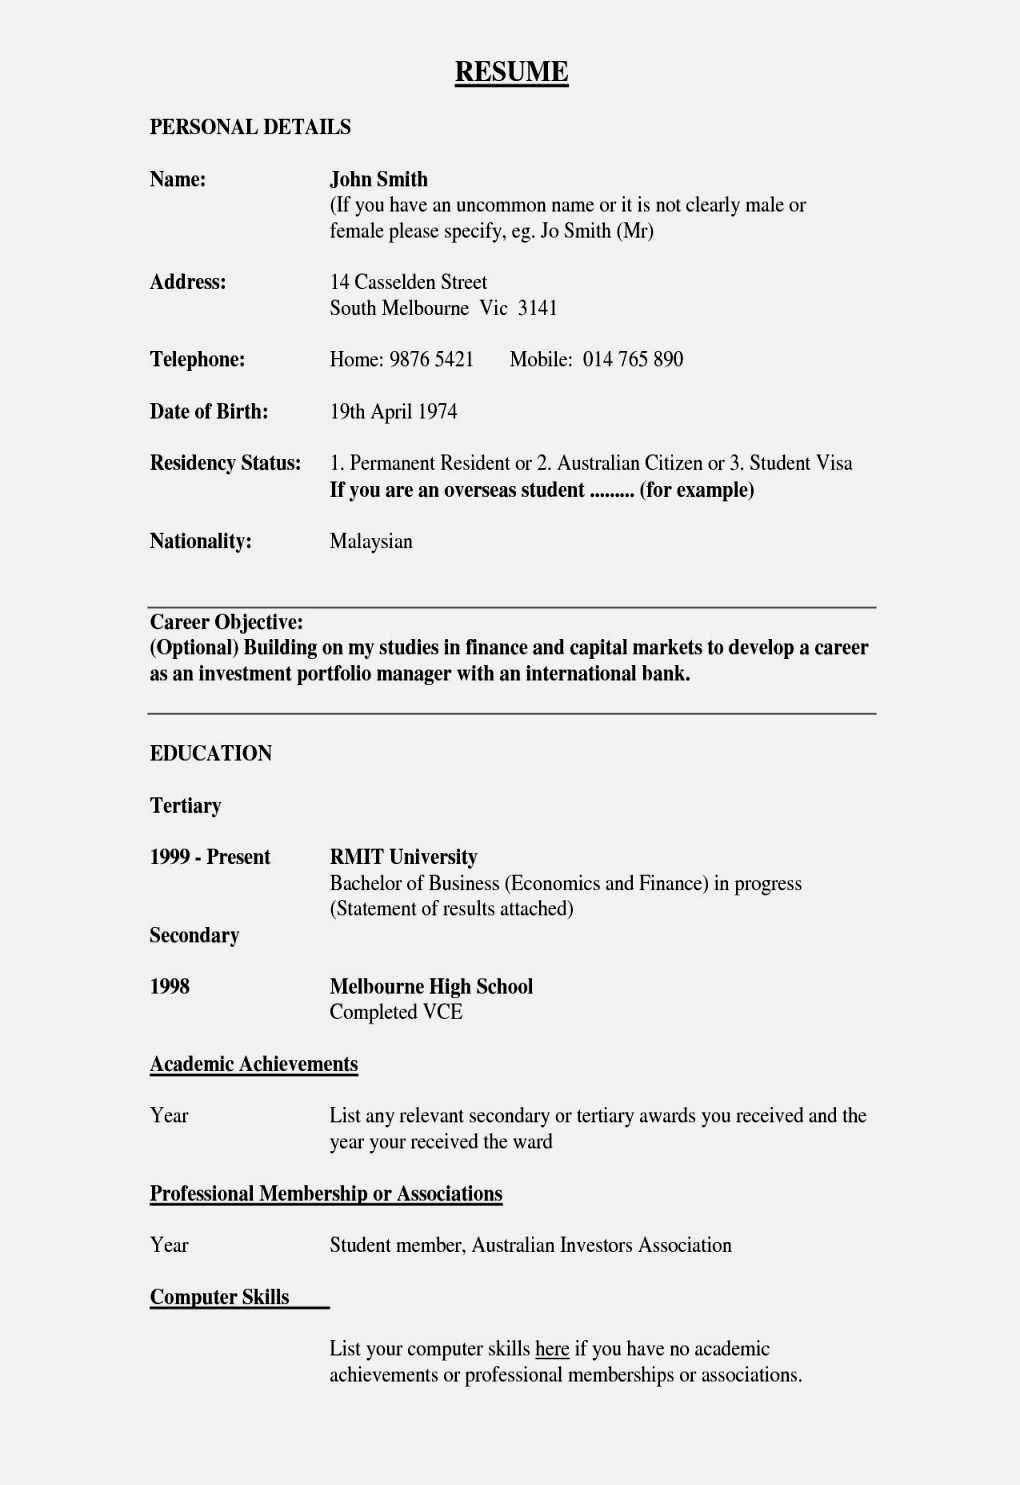 Sample Resume to Apply for Bank Jobs Bank Teller Resume No Experienceâ¢ Printable Resume Template …